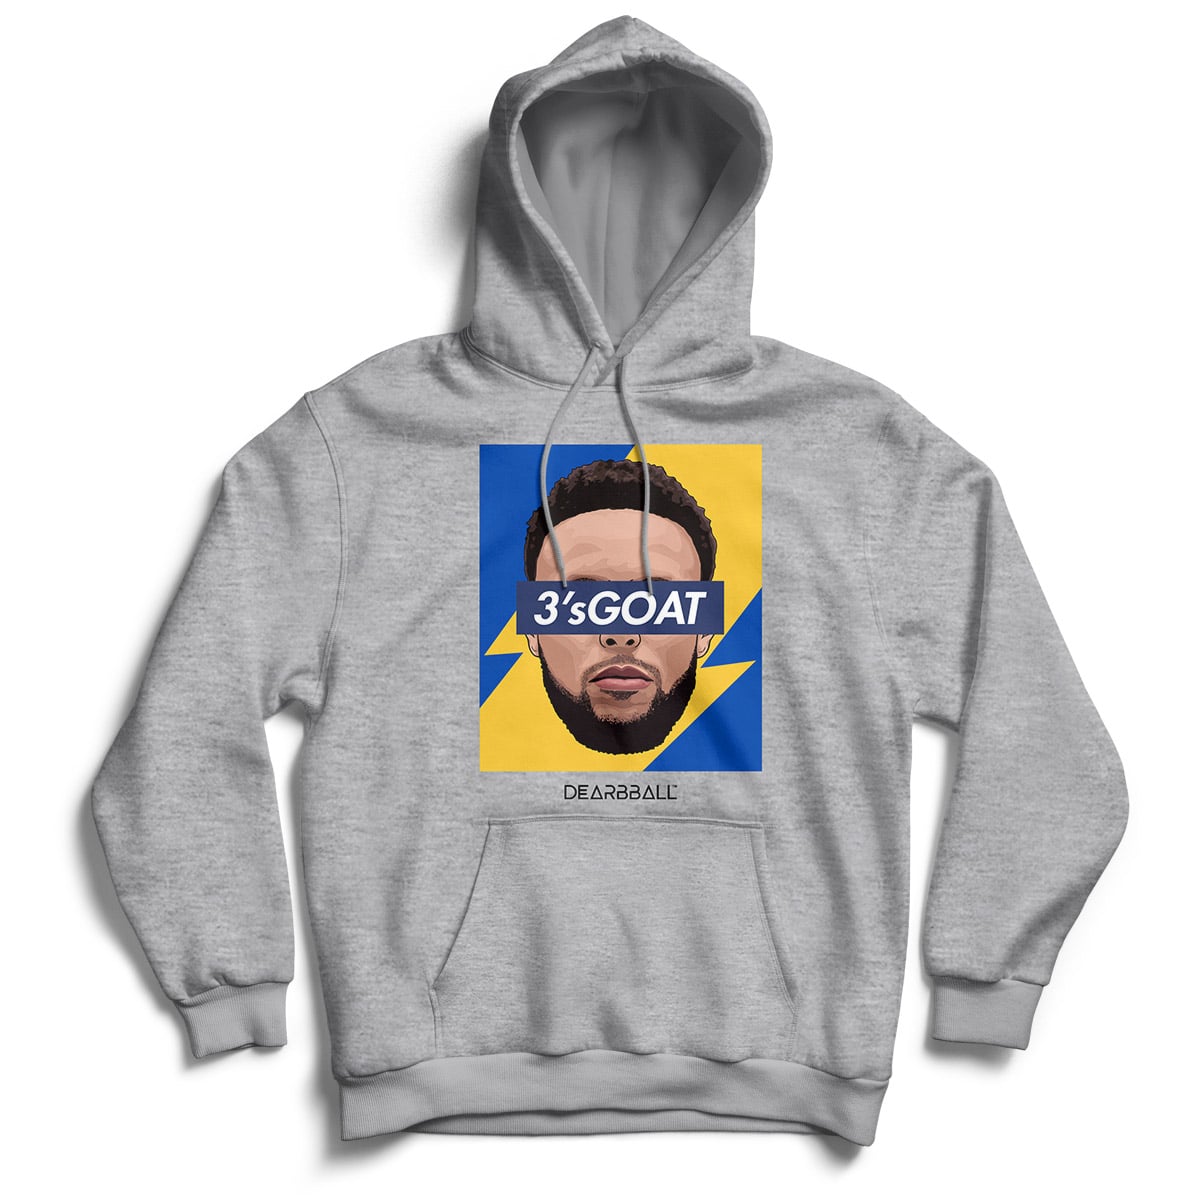 DEARBBALL HOODIE STEPHEN CURRY - 3`sGOAT ECLAIR VINTAGE SUPREMACY